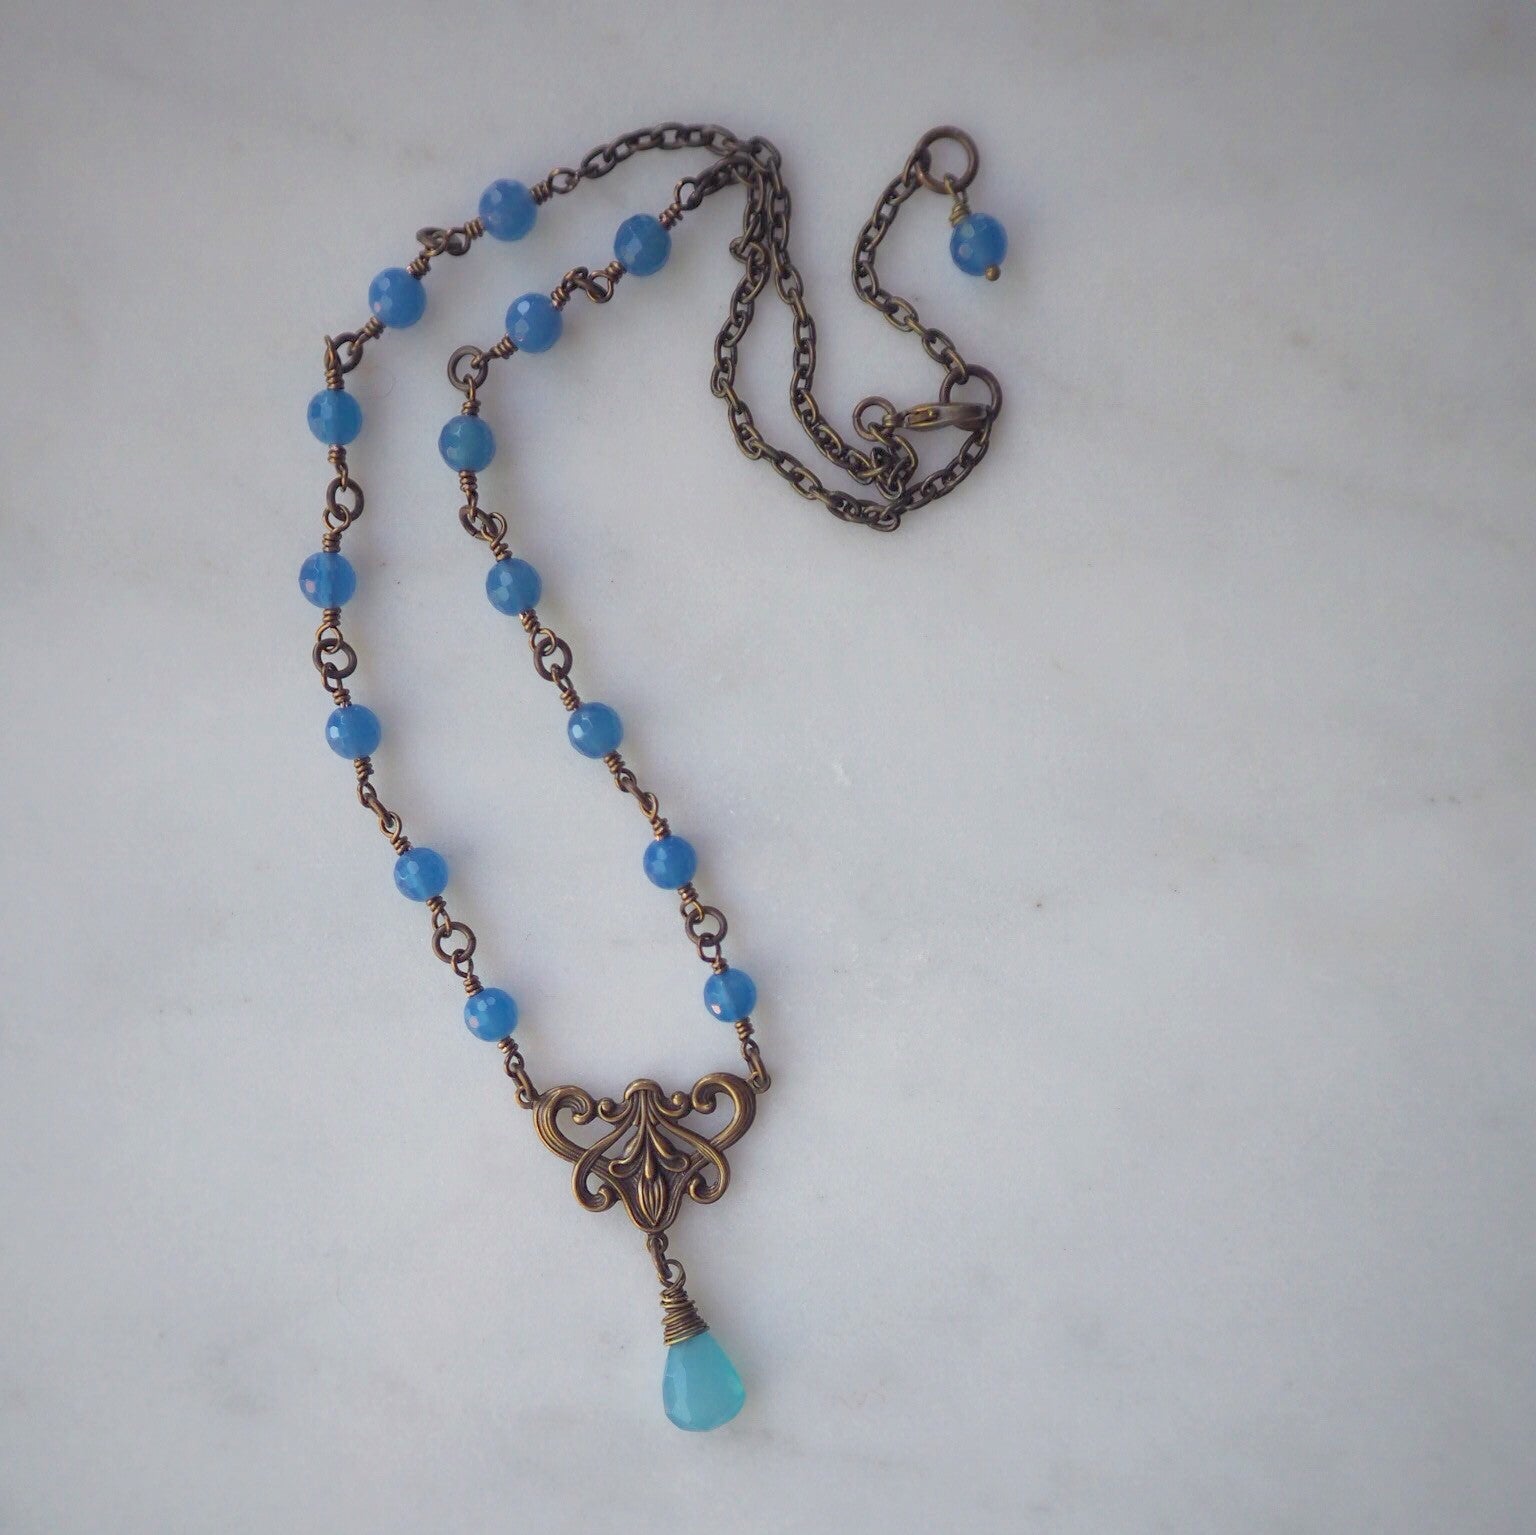 Bohemian Necklace with Blue Agate and Chalcedony Gemstones